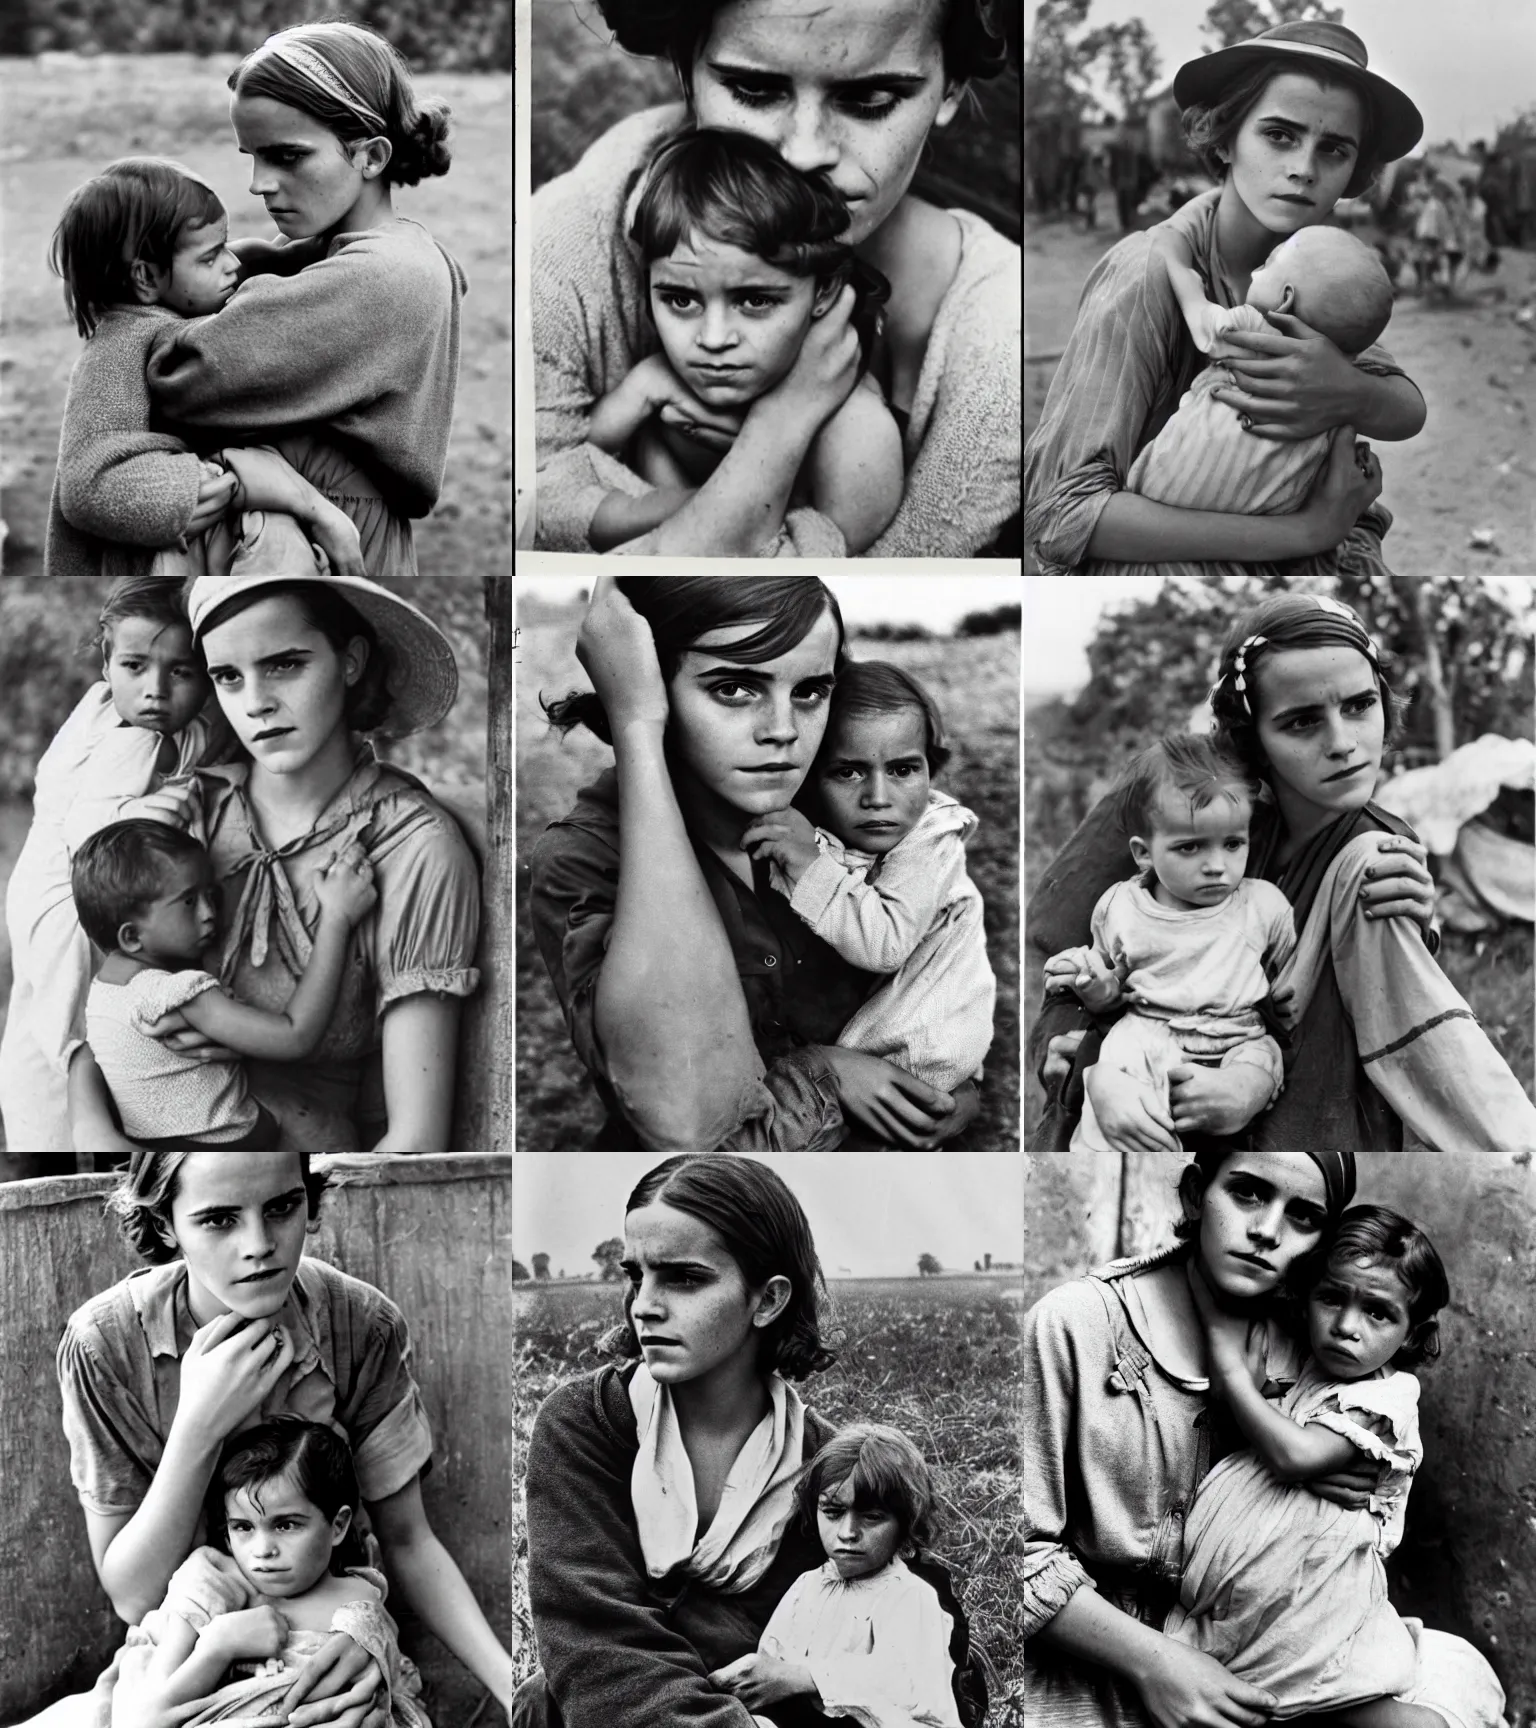 Prompt: Emma Watson as migrant mother, 1936 photo by Dorothea Lange